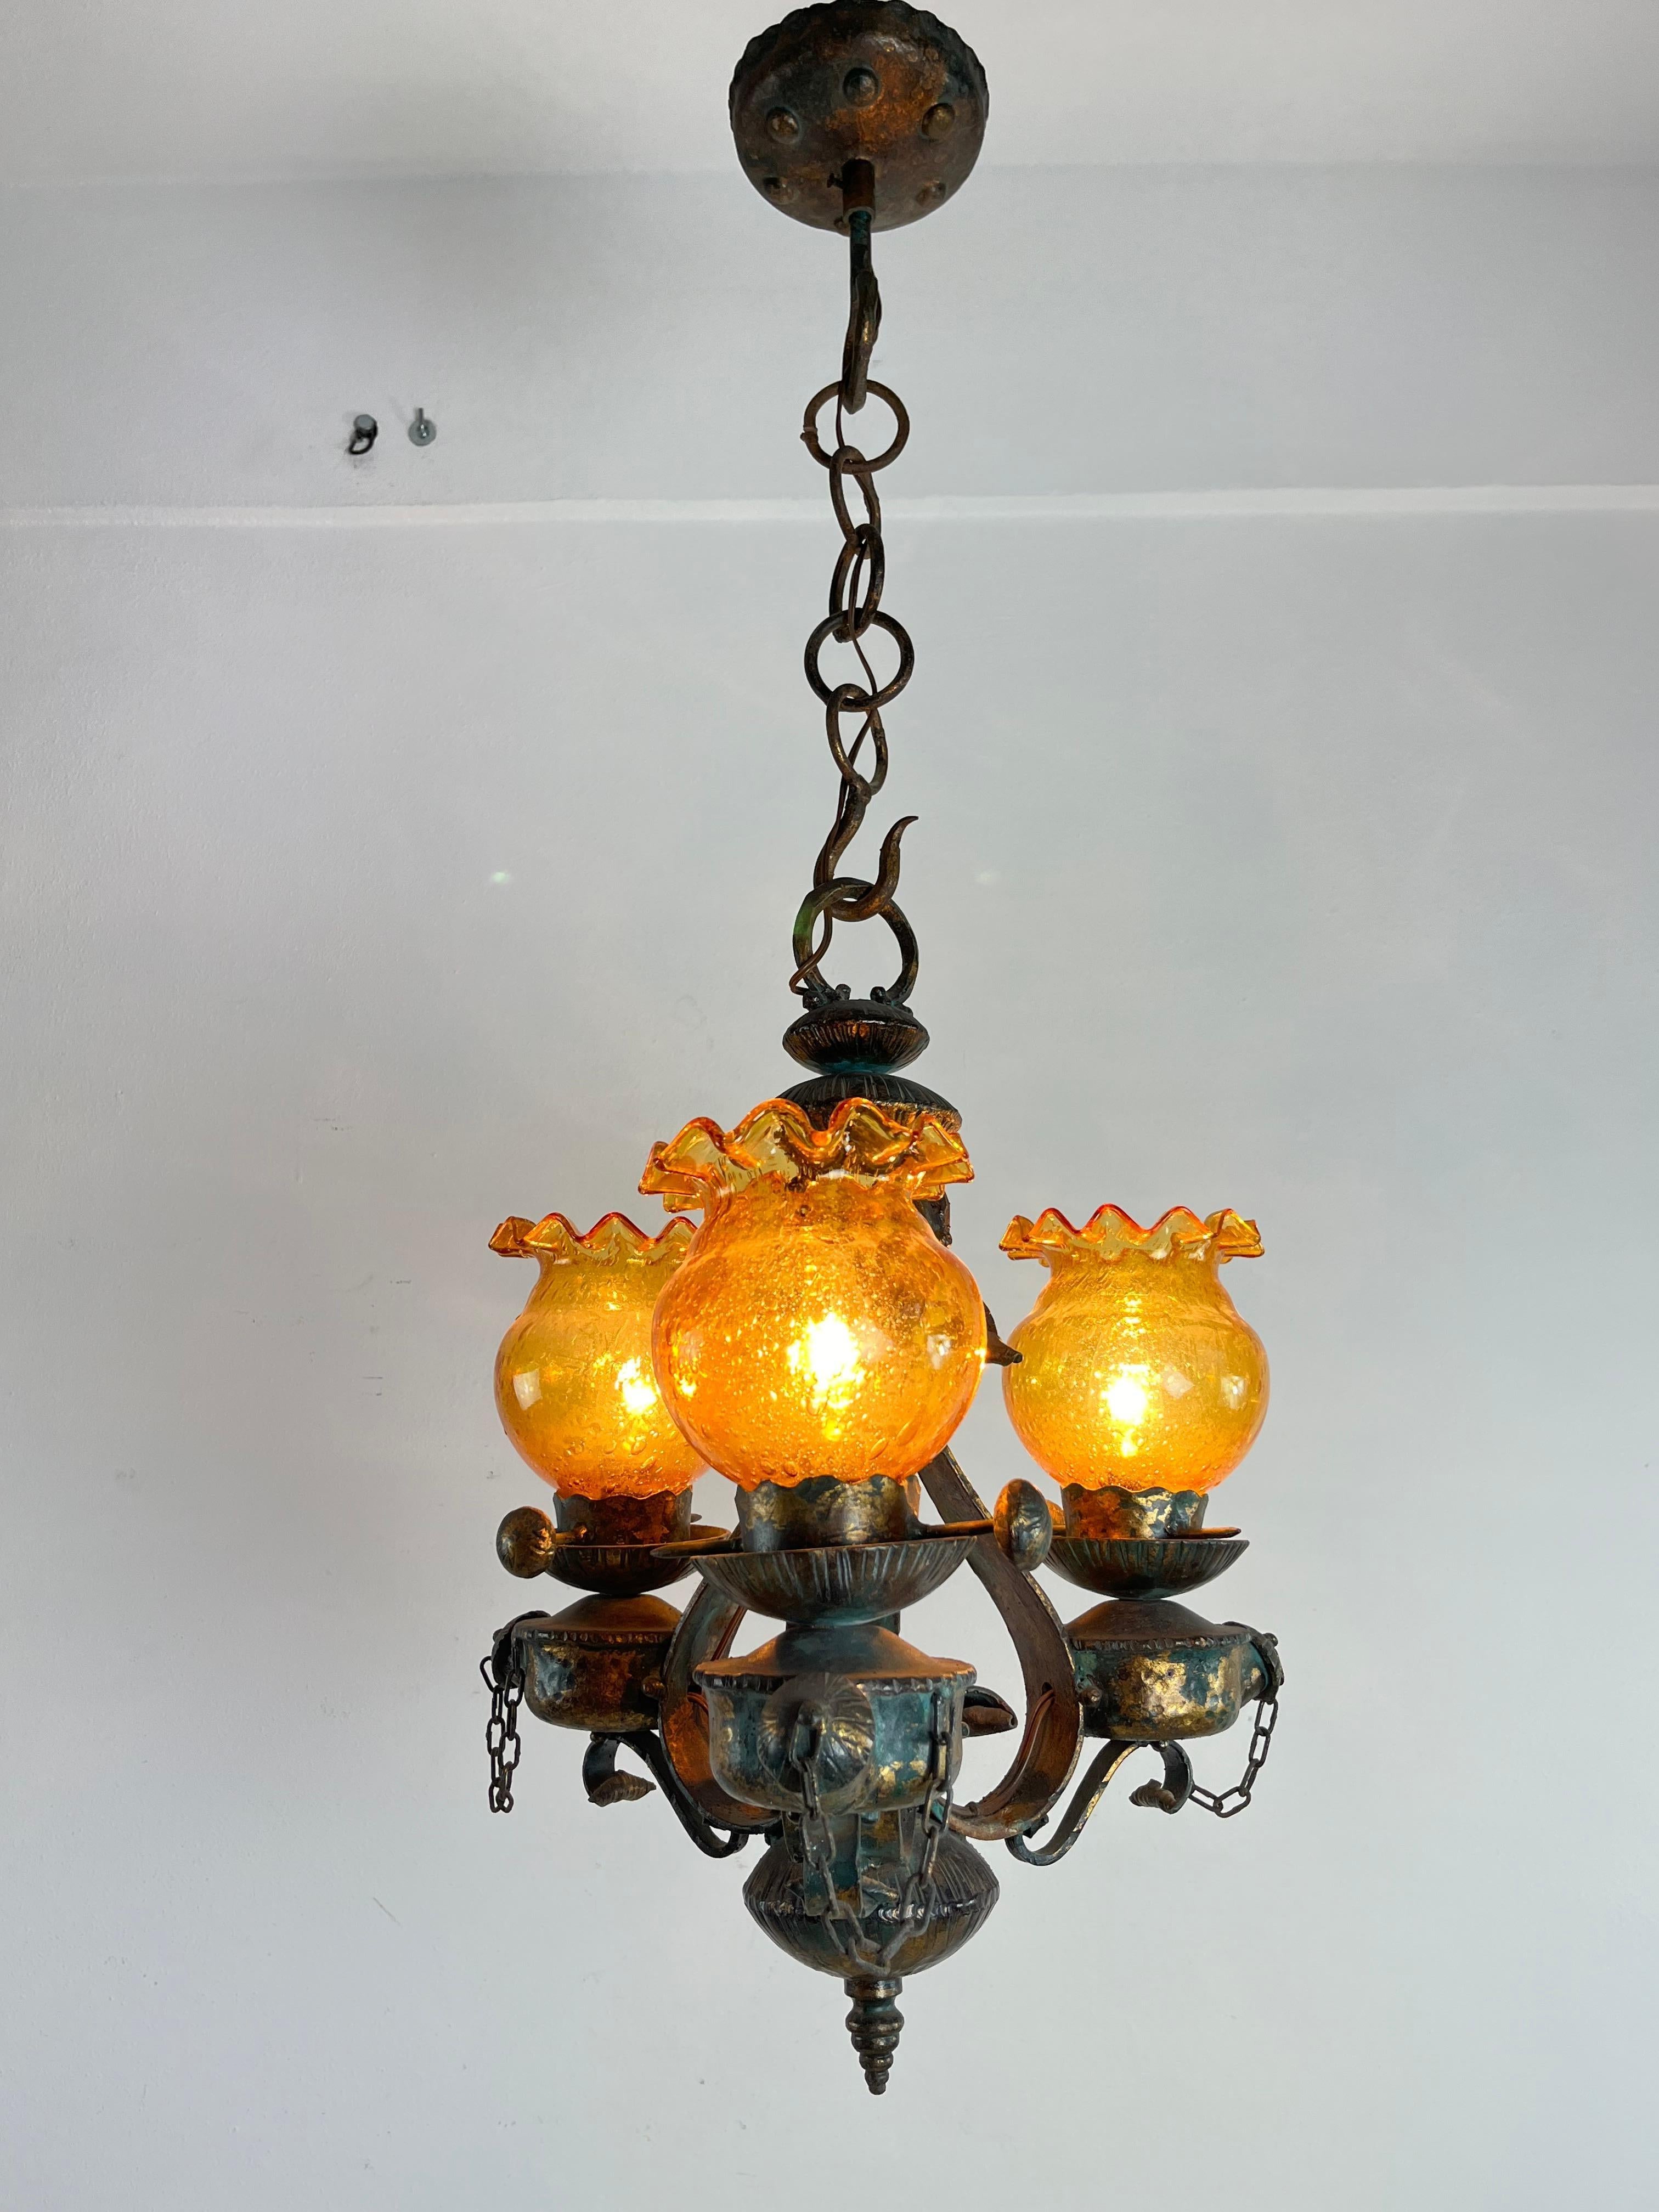 Mid-Century Brutalist iron and glass chandelier, 1960s
3 lights, e14 lamps.
Intact and working, good condition.Height 50 cm, 95 cm including the chain.


We guarantee adequate packaging and will ship via DHL, insuring the contents against any